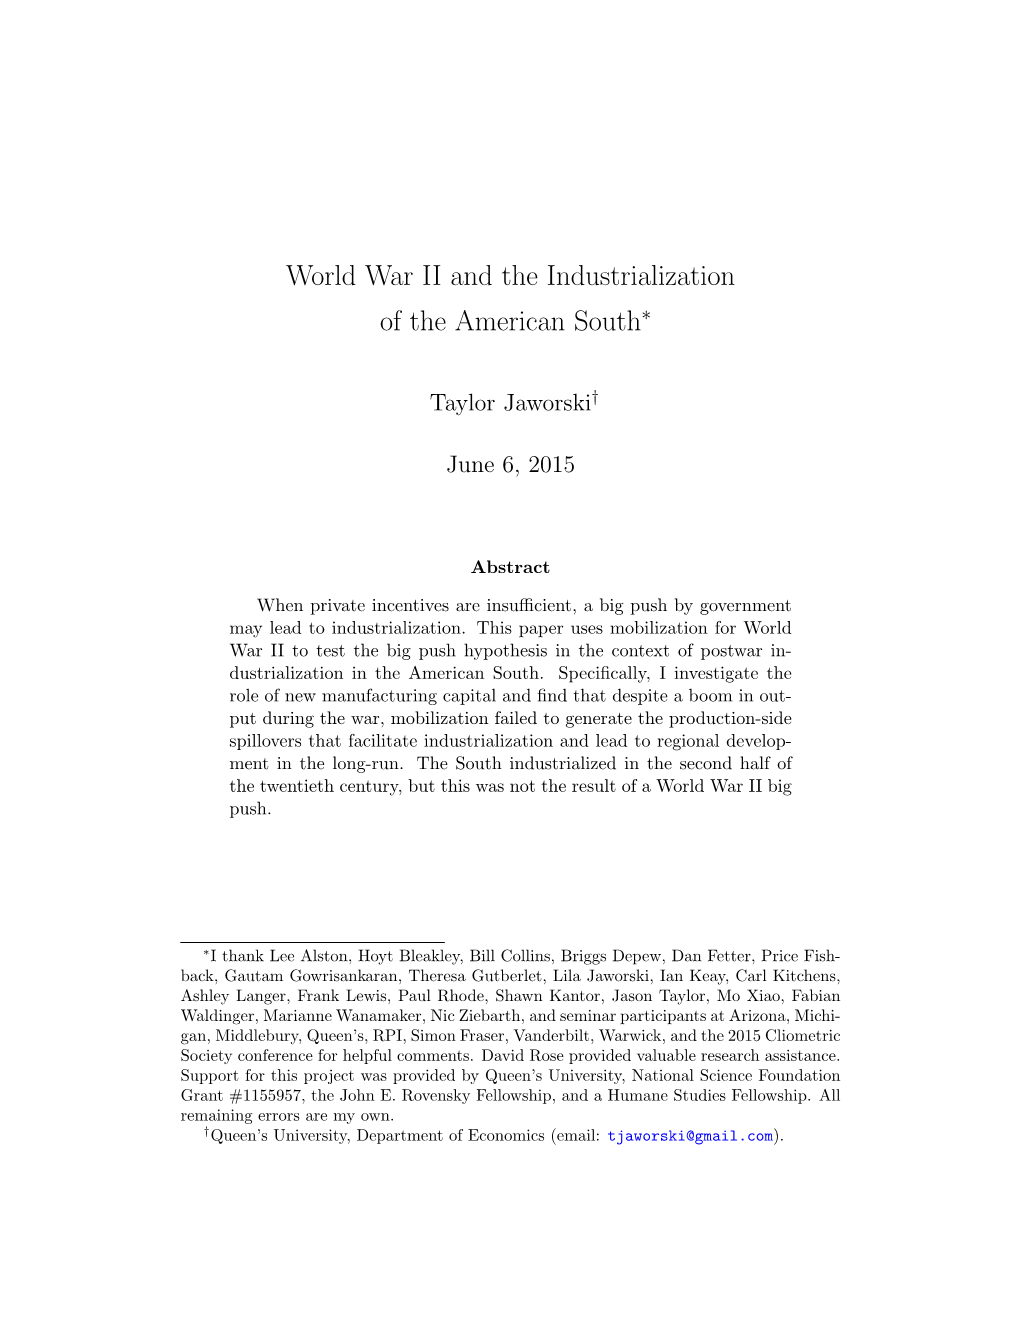 World War II and the Industrialization of the American South∗